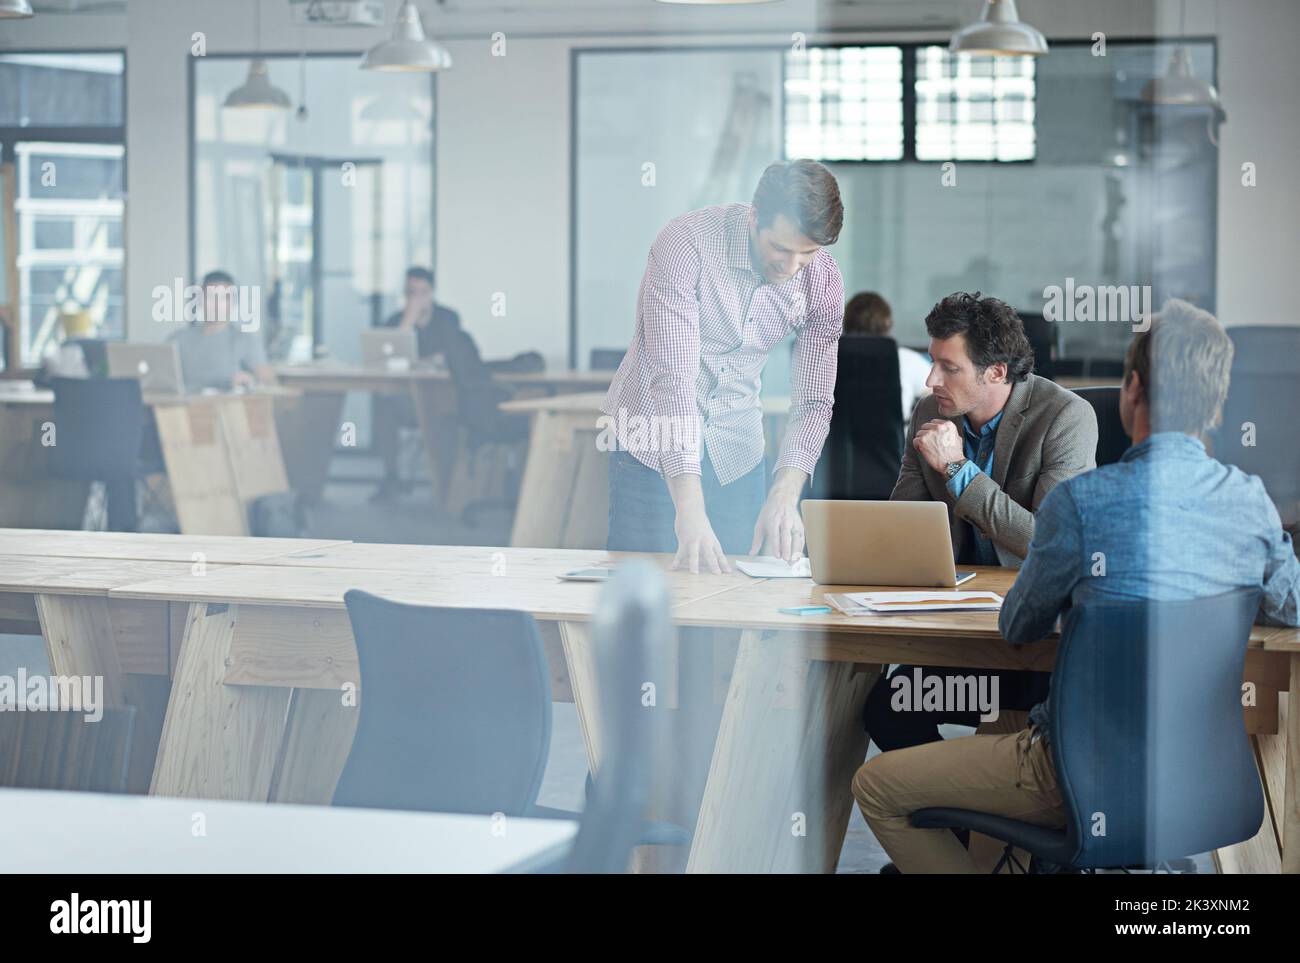 Getting down to business. Through the glass shot of a group of colleagues working together in an office. Stock Photo